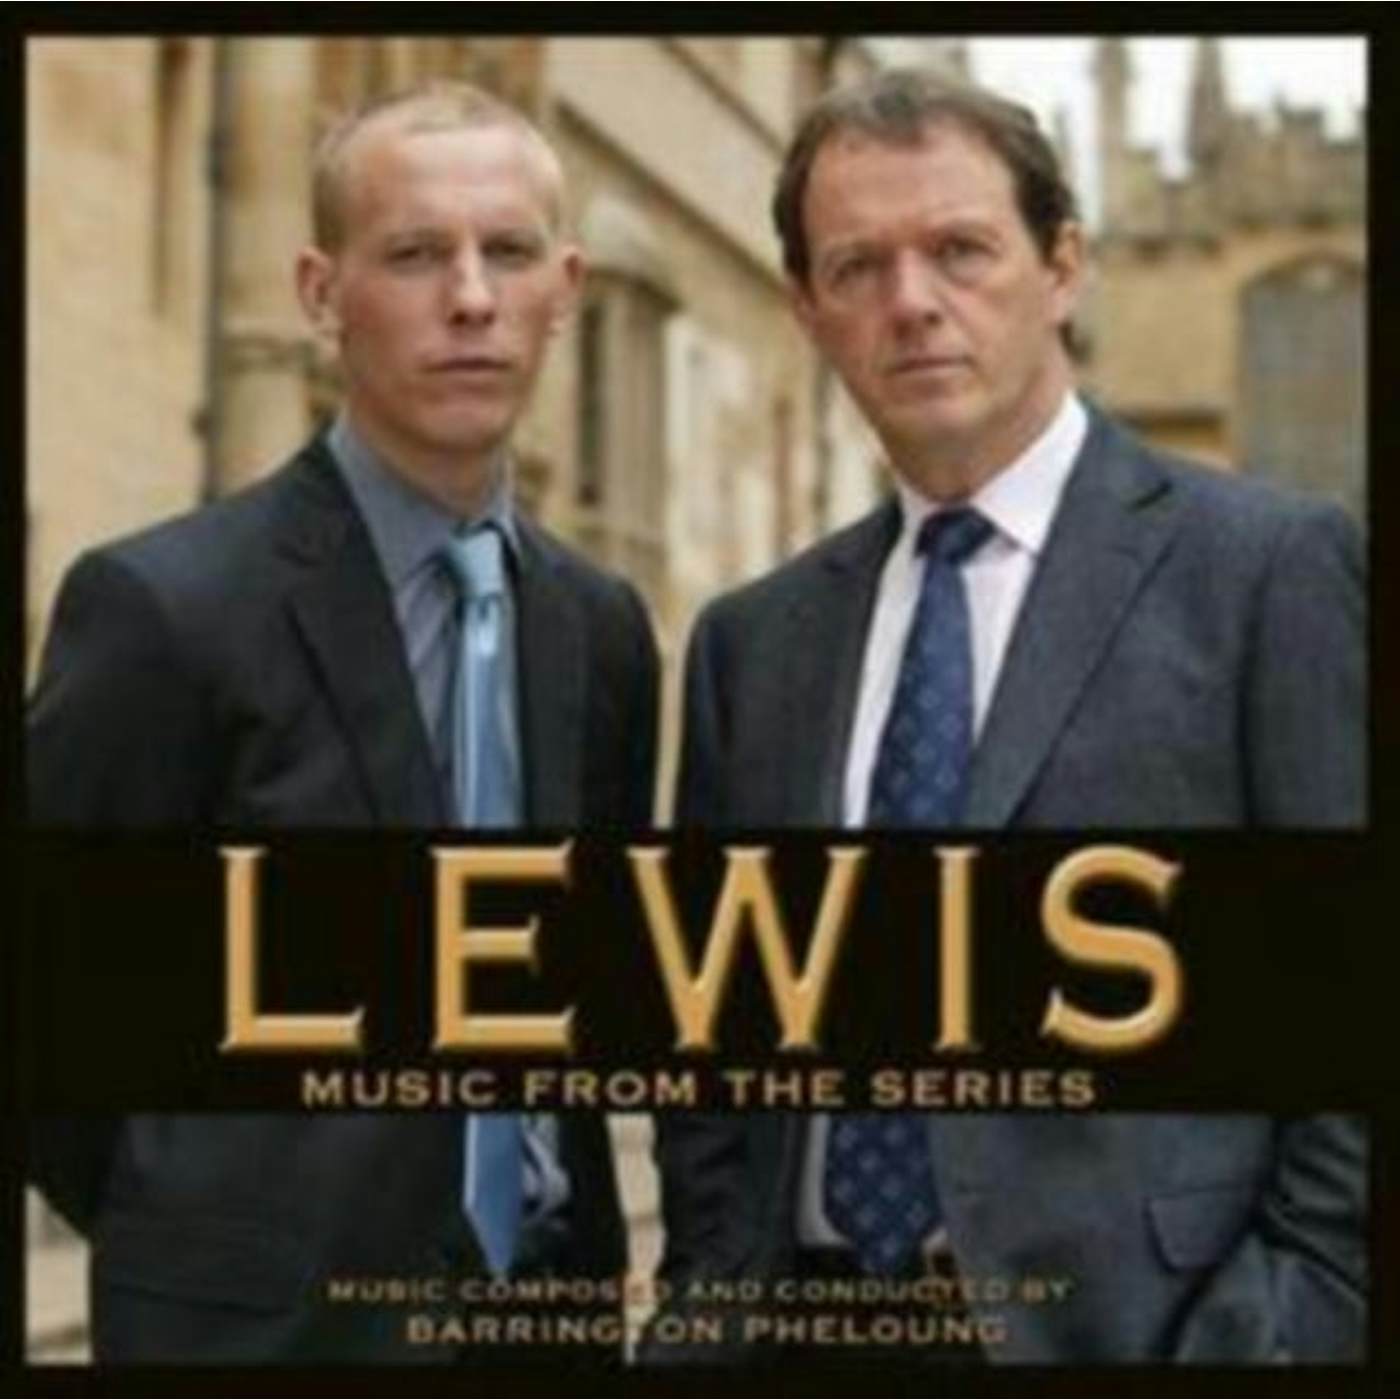 Barrington Pheloung CD - Lewis - Music From The Tv Series